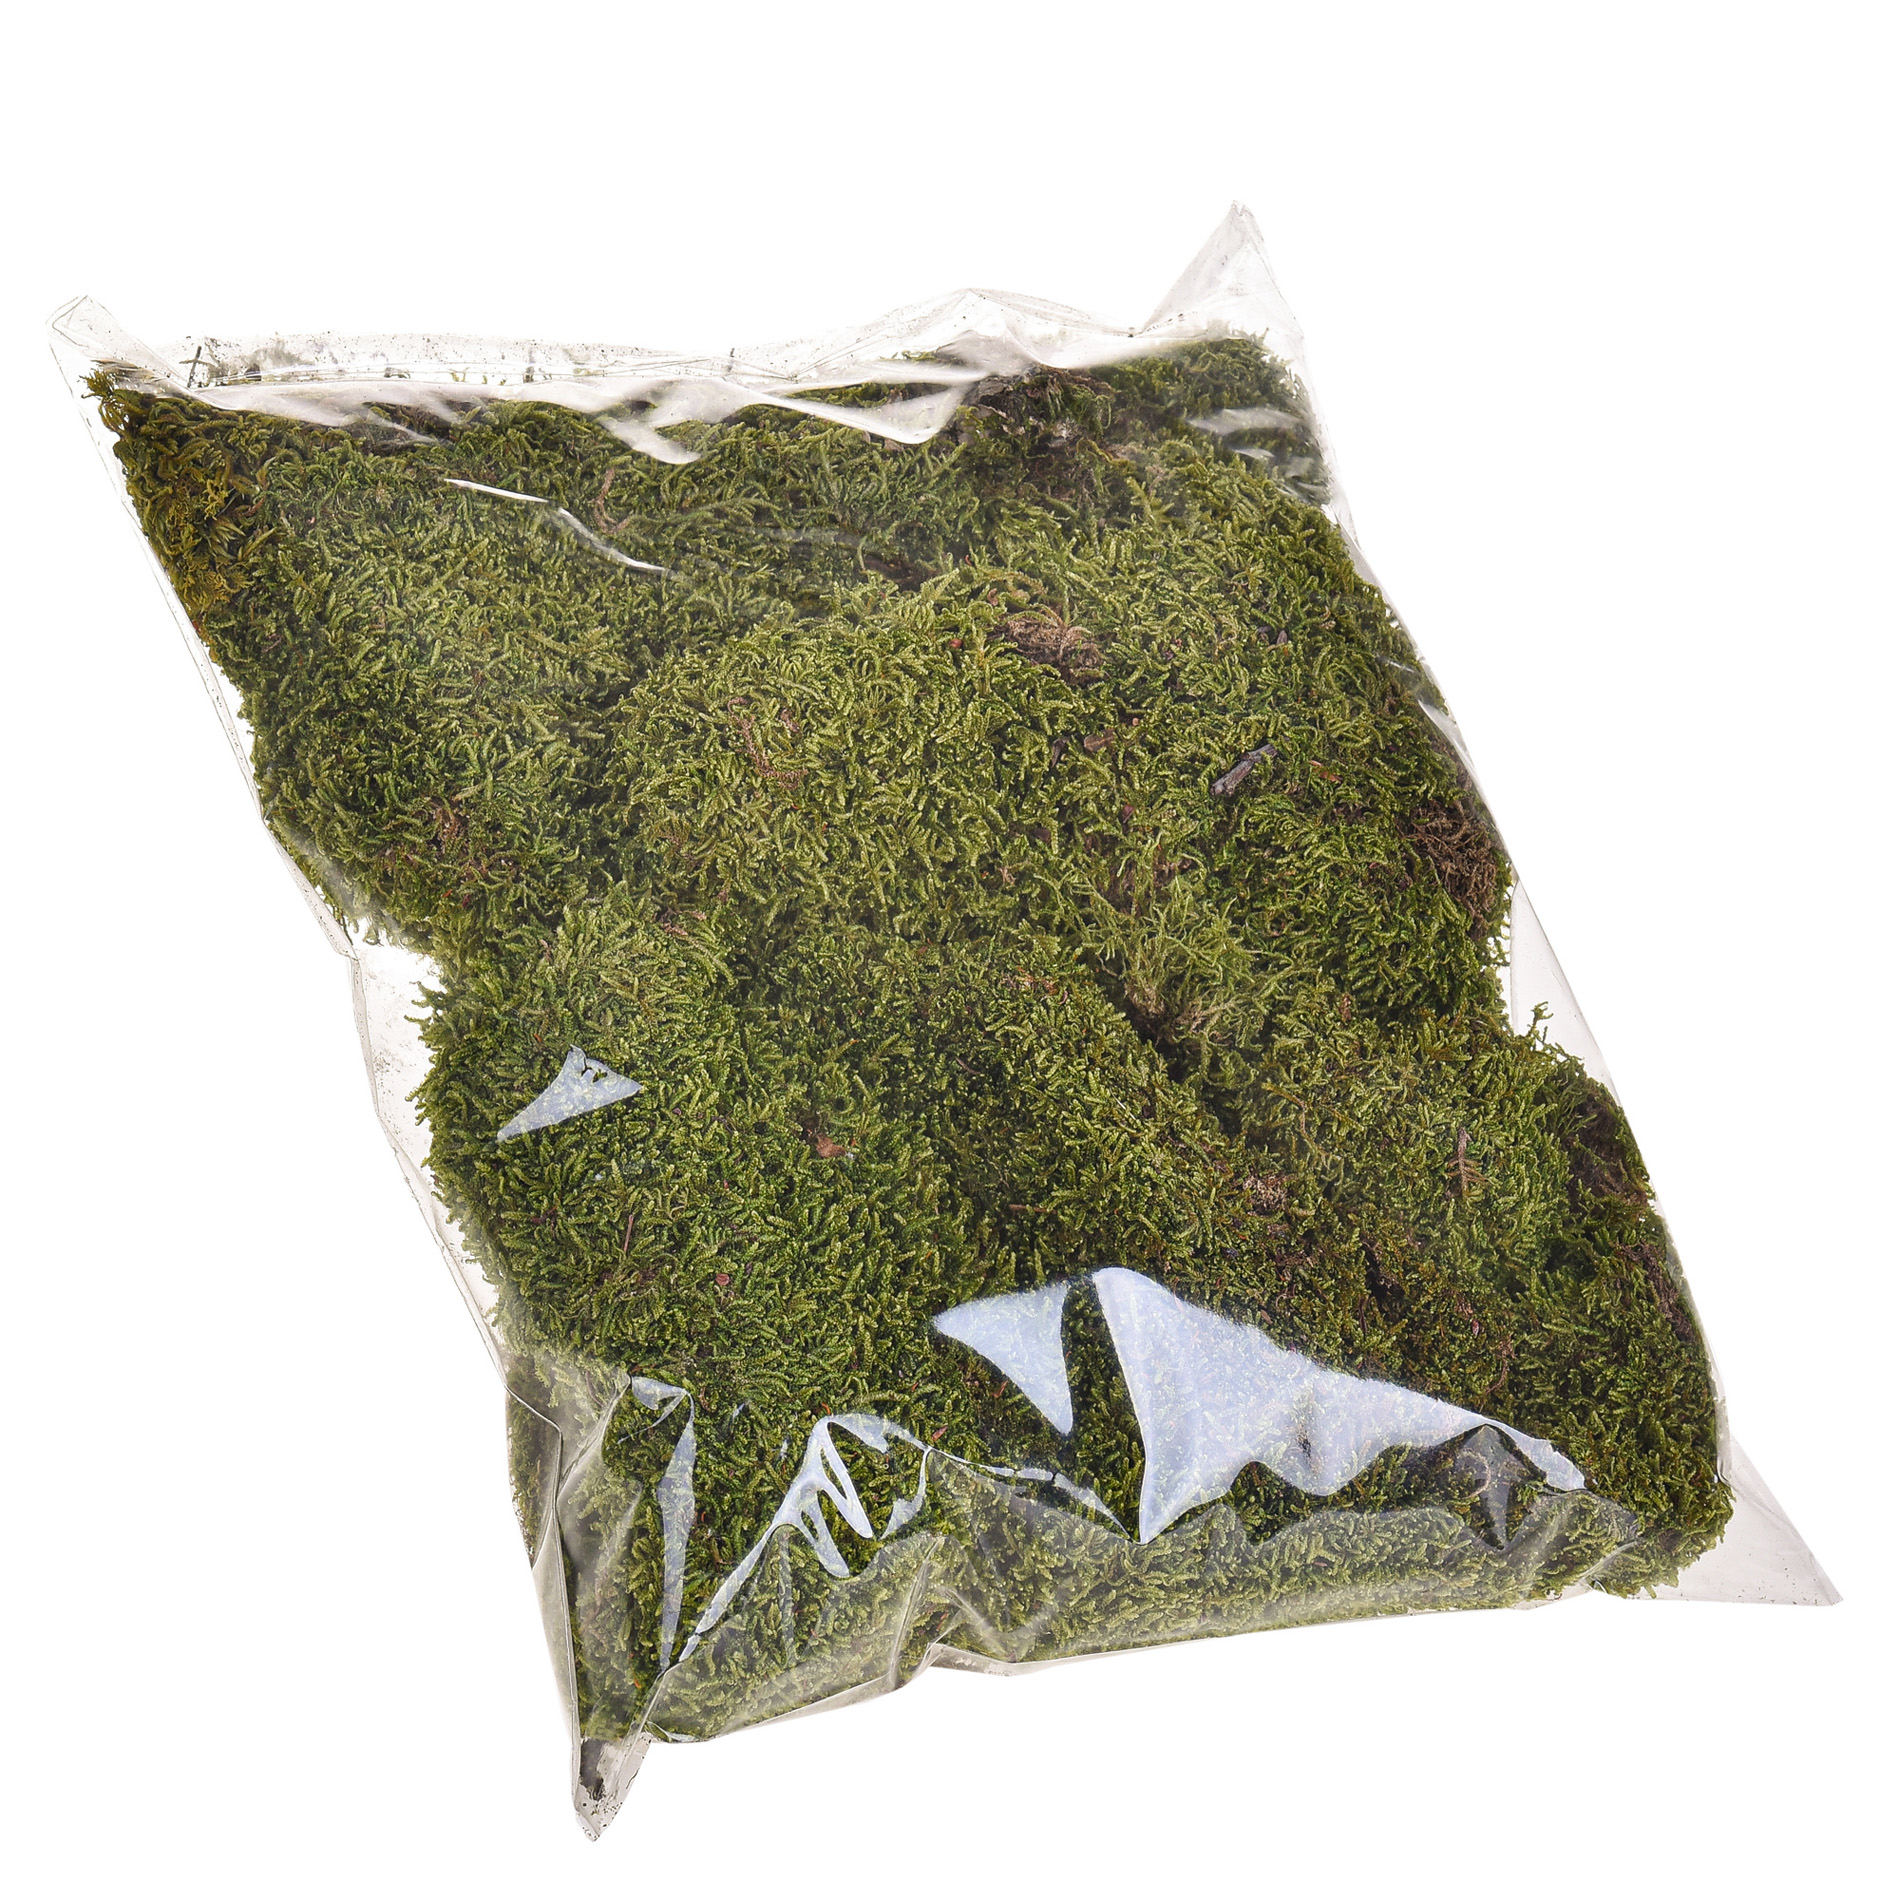 PLANTS, GREENERY , MOOS, palm preserved or natural, MUSCHIO STESO 90 GR SACCO